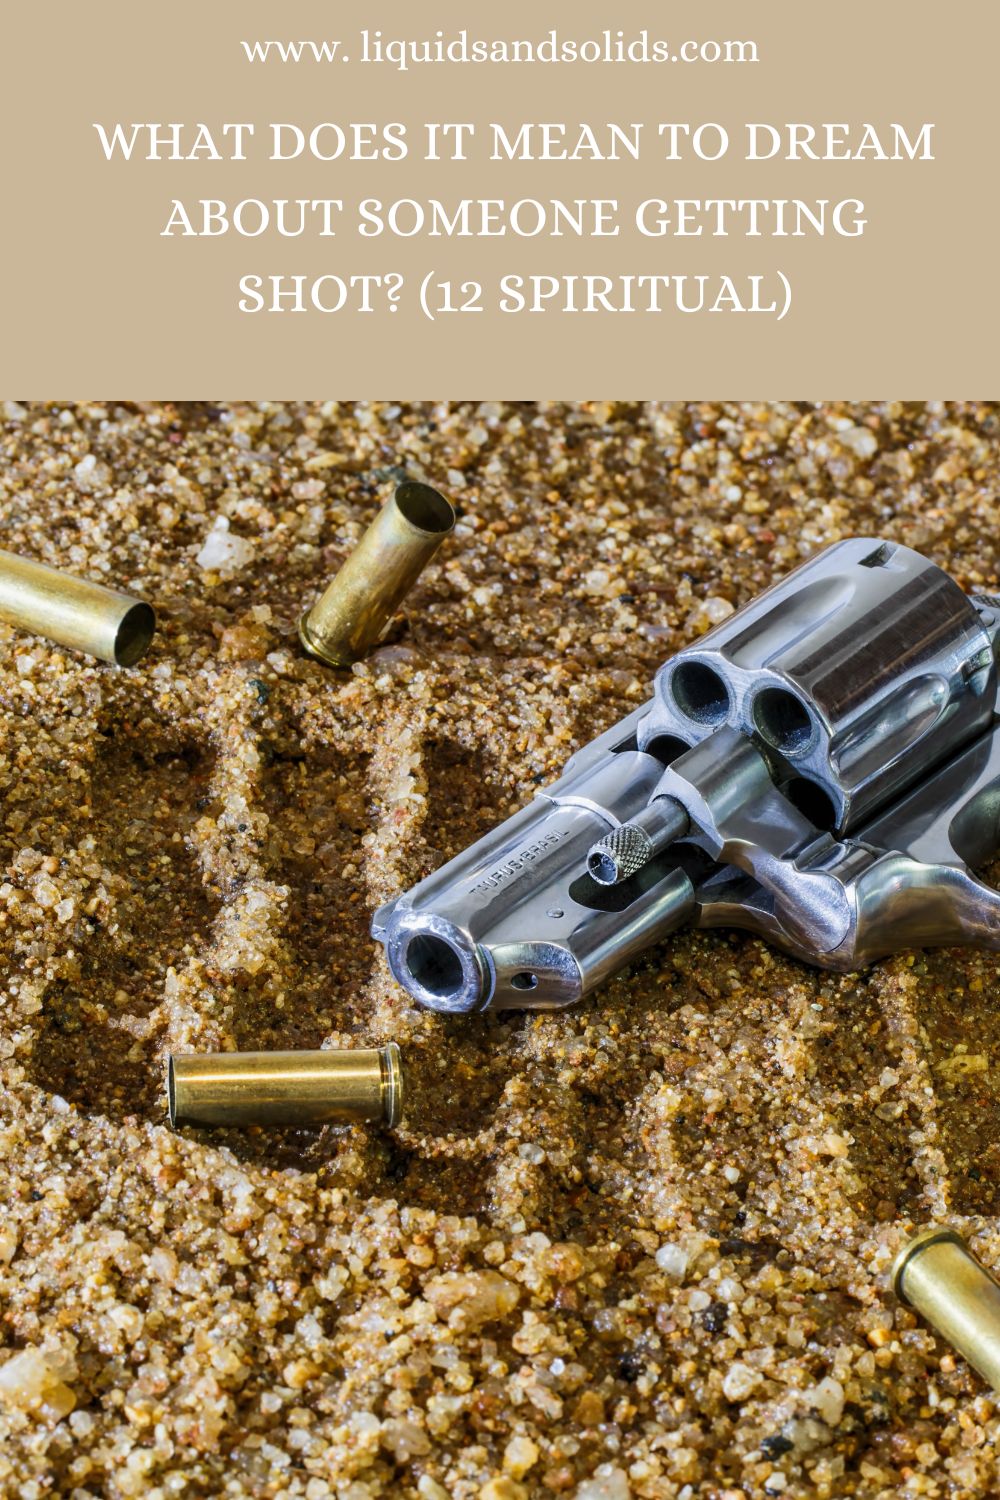 What Is The Spiritual Meaning Of A Gun In A Dream?